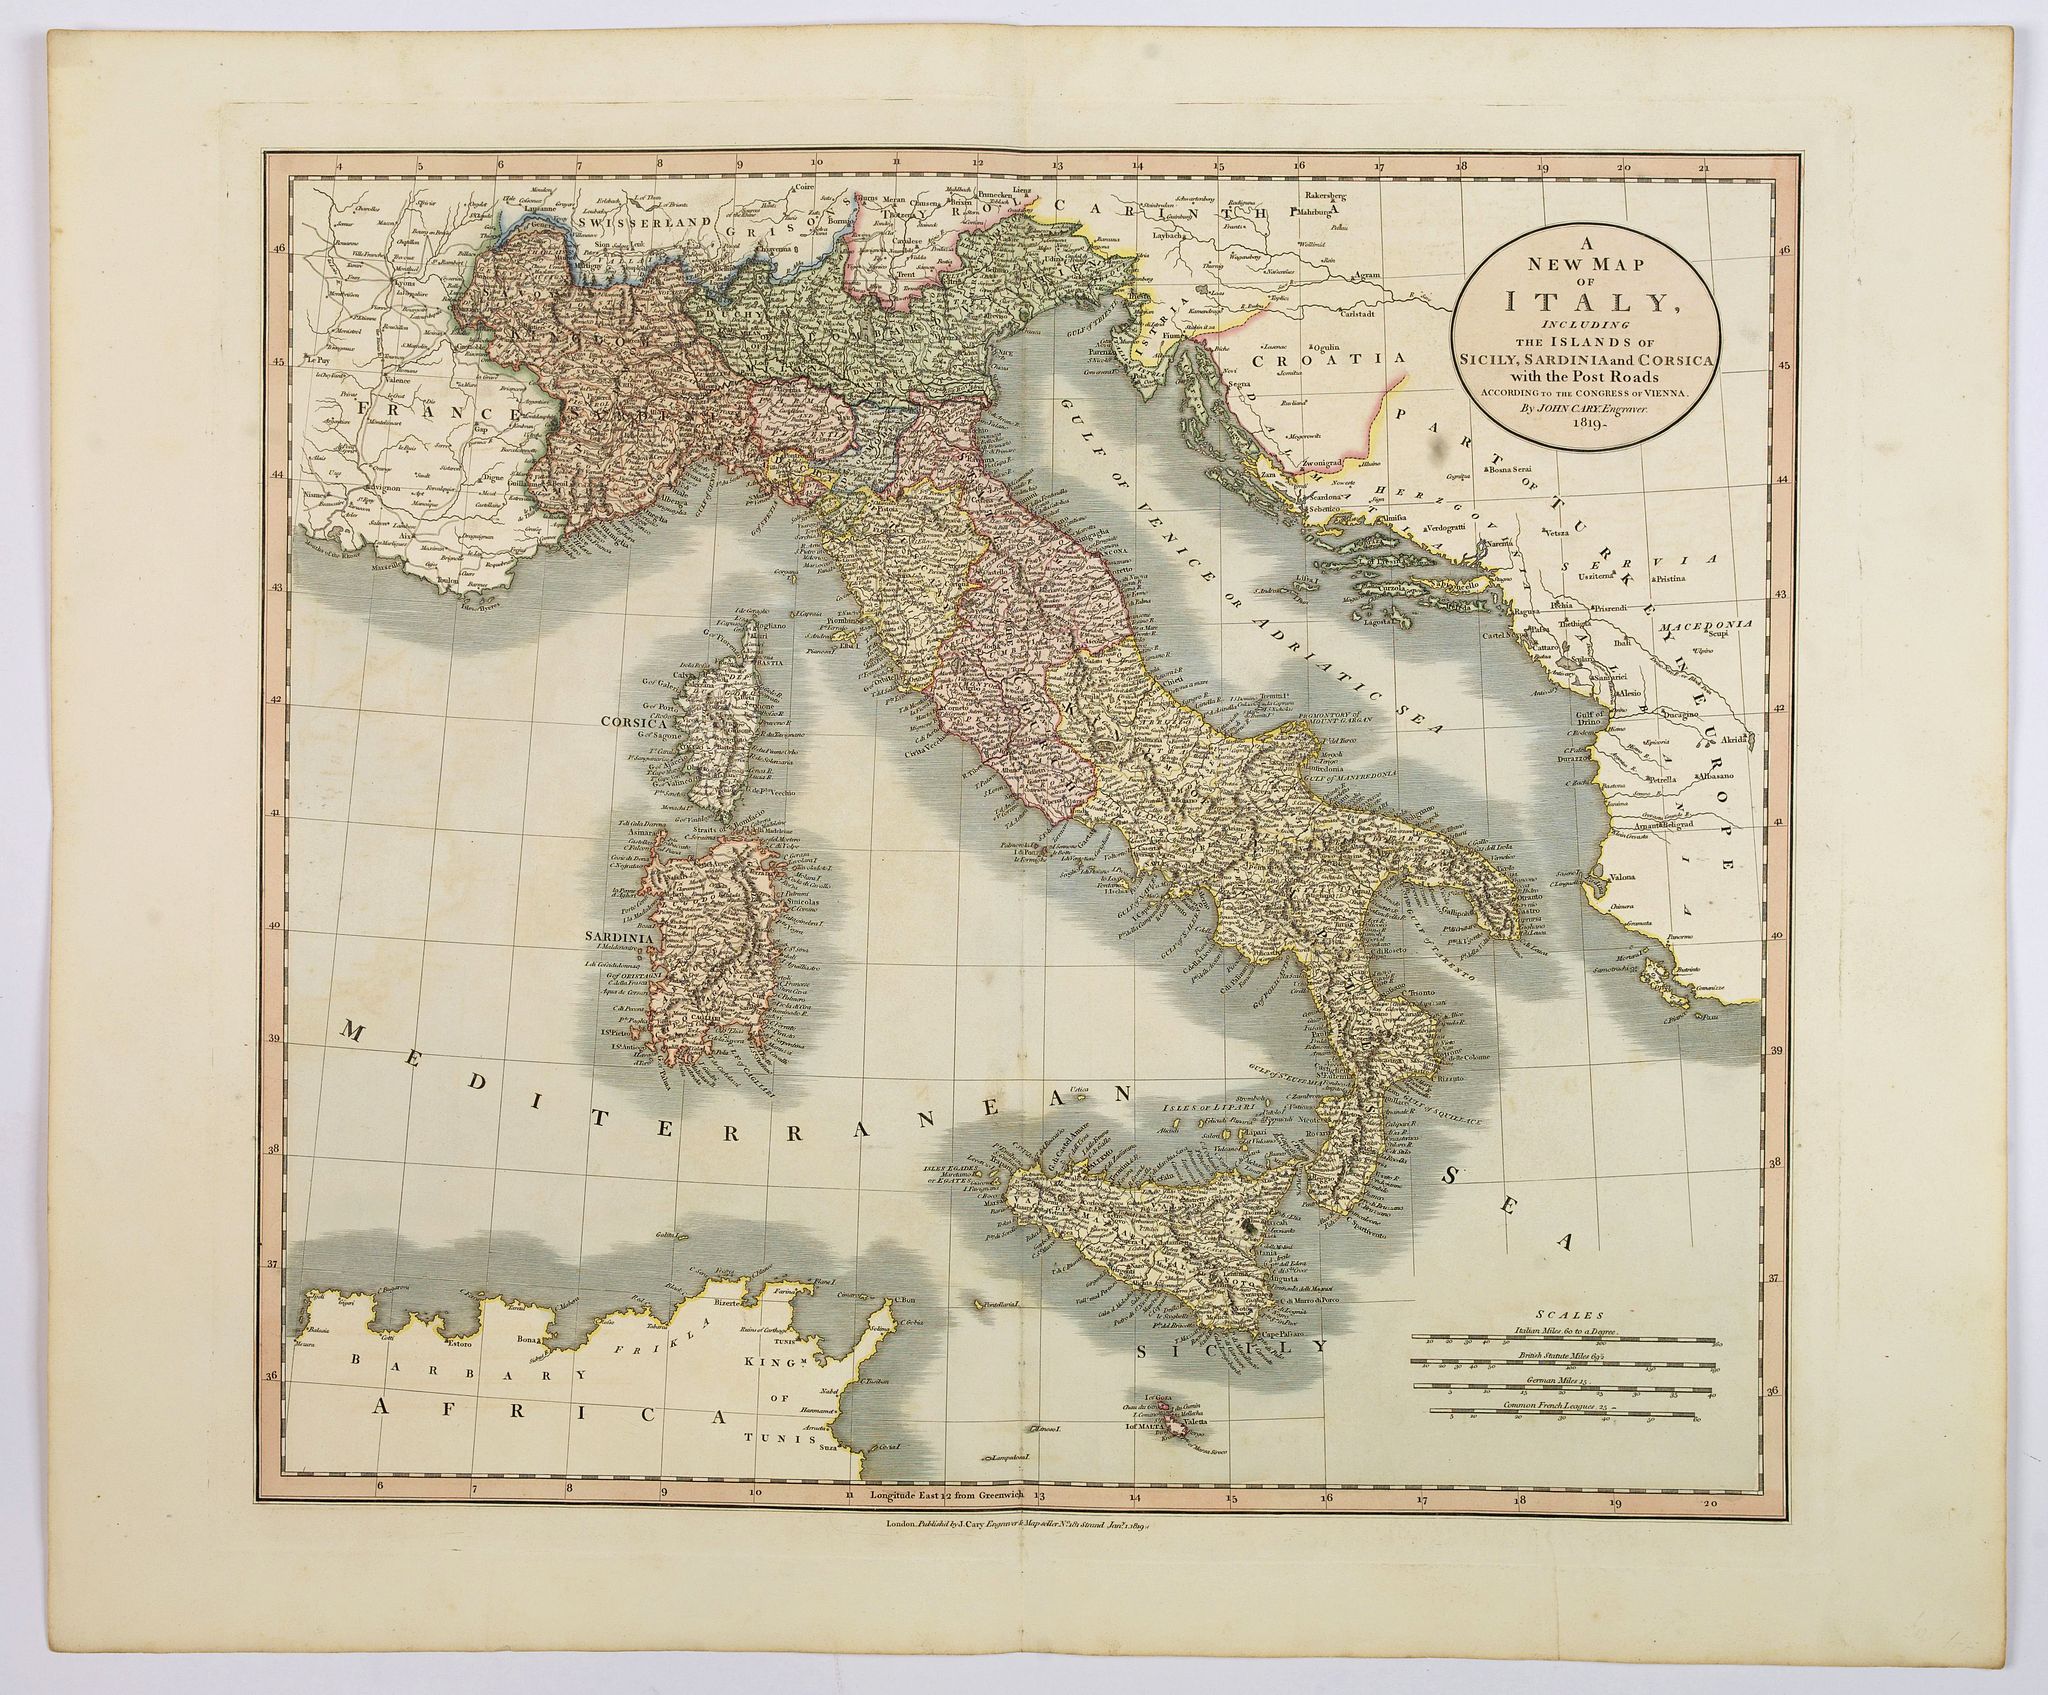 A New Map of Italy. . .